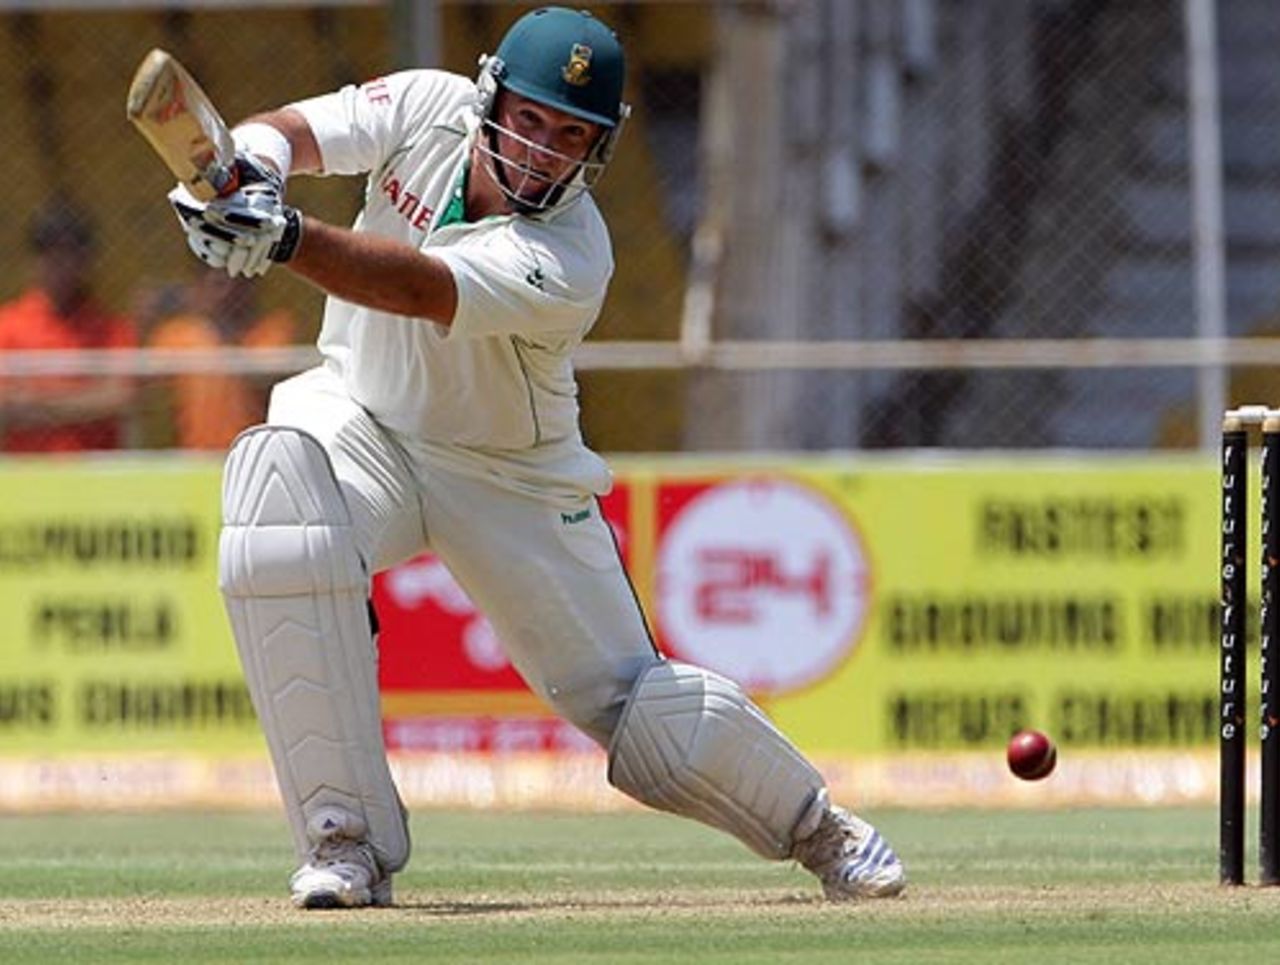 Graeme Smith plays the ball through the off side, India v South Africa, 2nd Test, Ahmedabad, 1st day, April 3, 2008